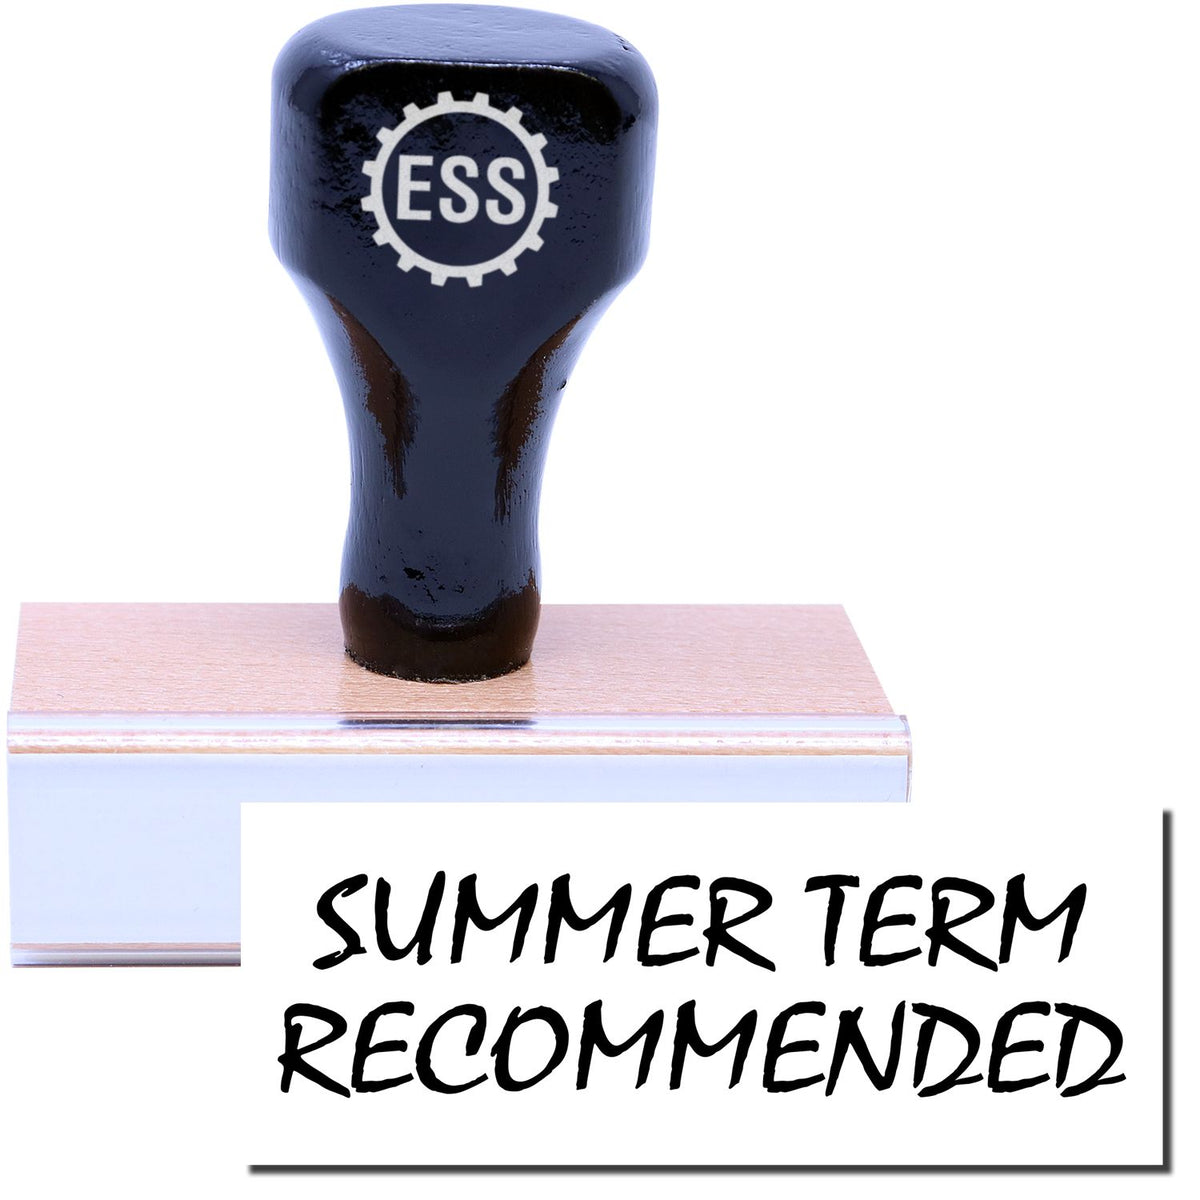 A stock office rubber stamp with a stamped image showing how the text &quot;SUMMER TERM RECOMMENDED&quot; is displayed after stamping.